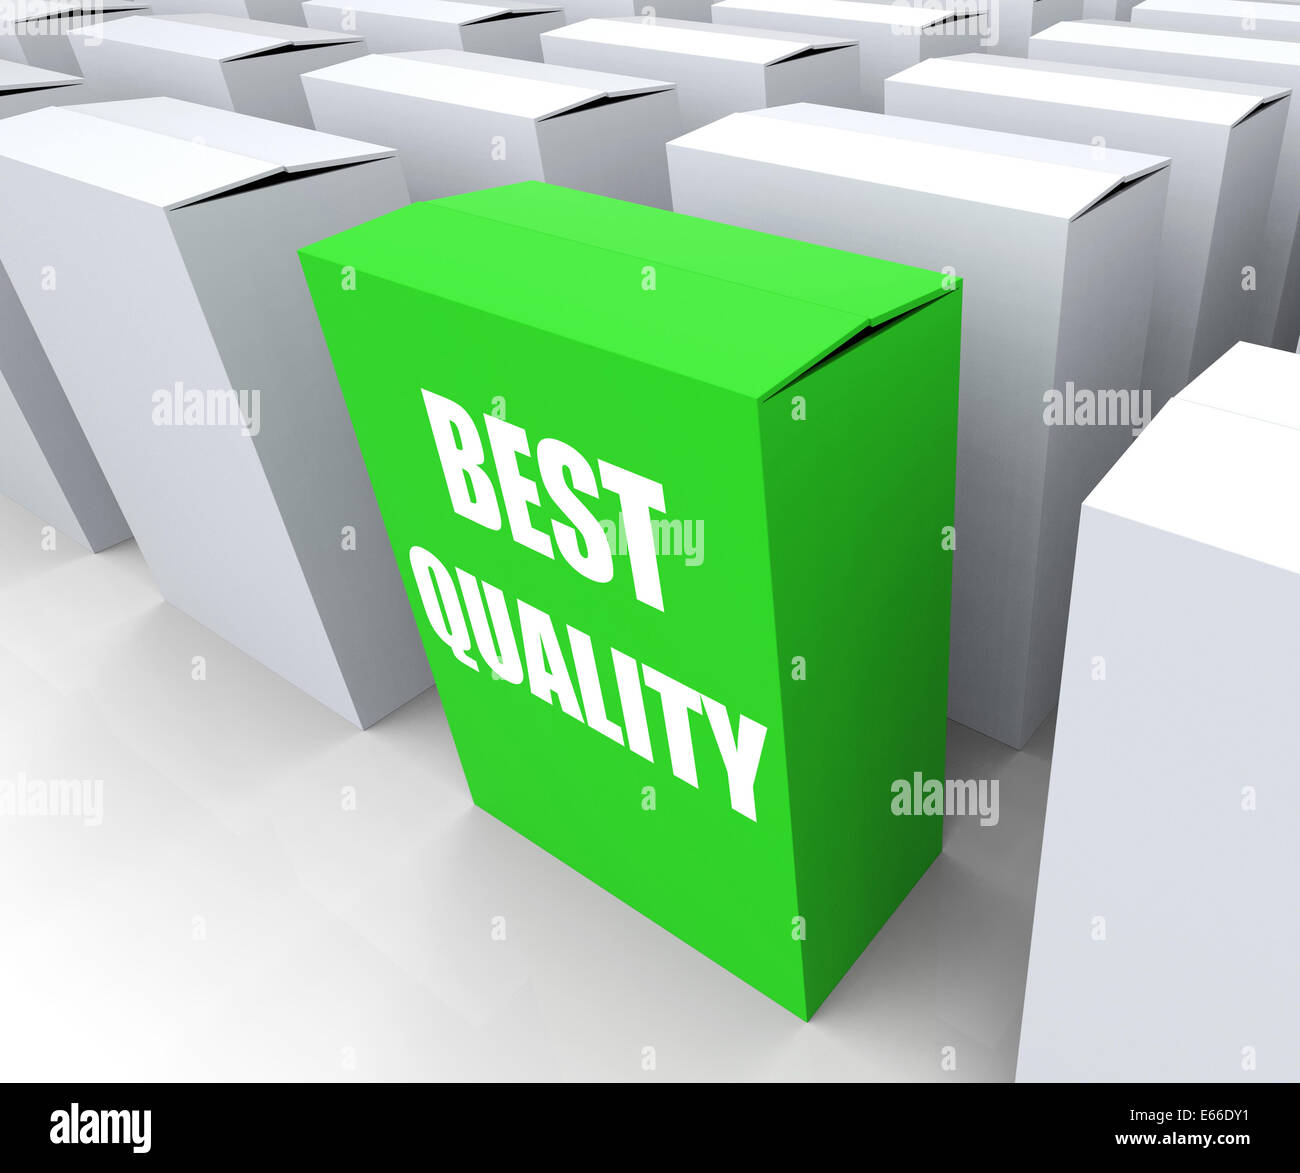 Best Quality Box Representing Premium Excellence and Superiority Stock Photo